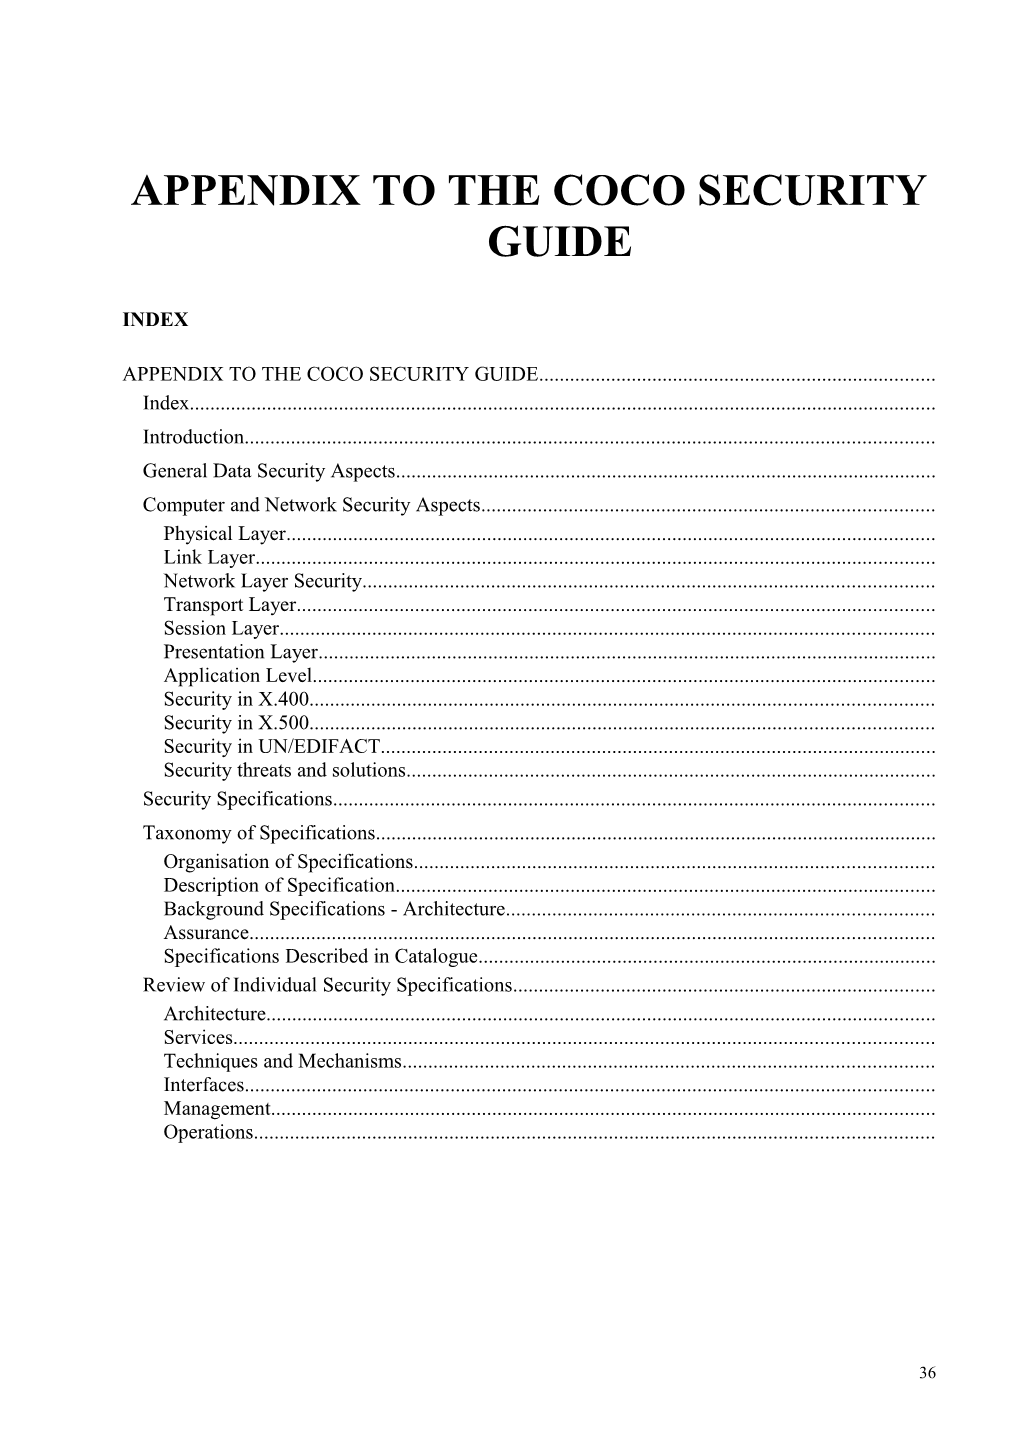 Appendix to the Coco Security Guide